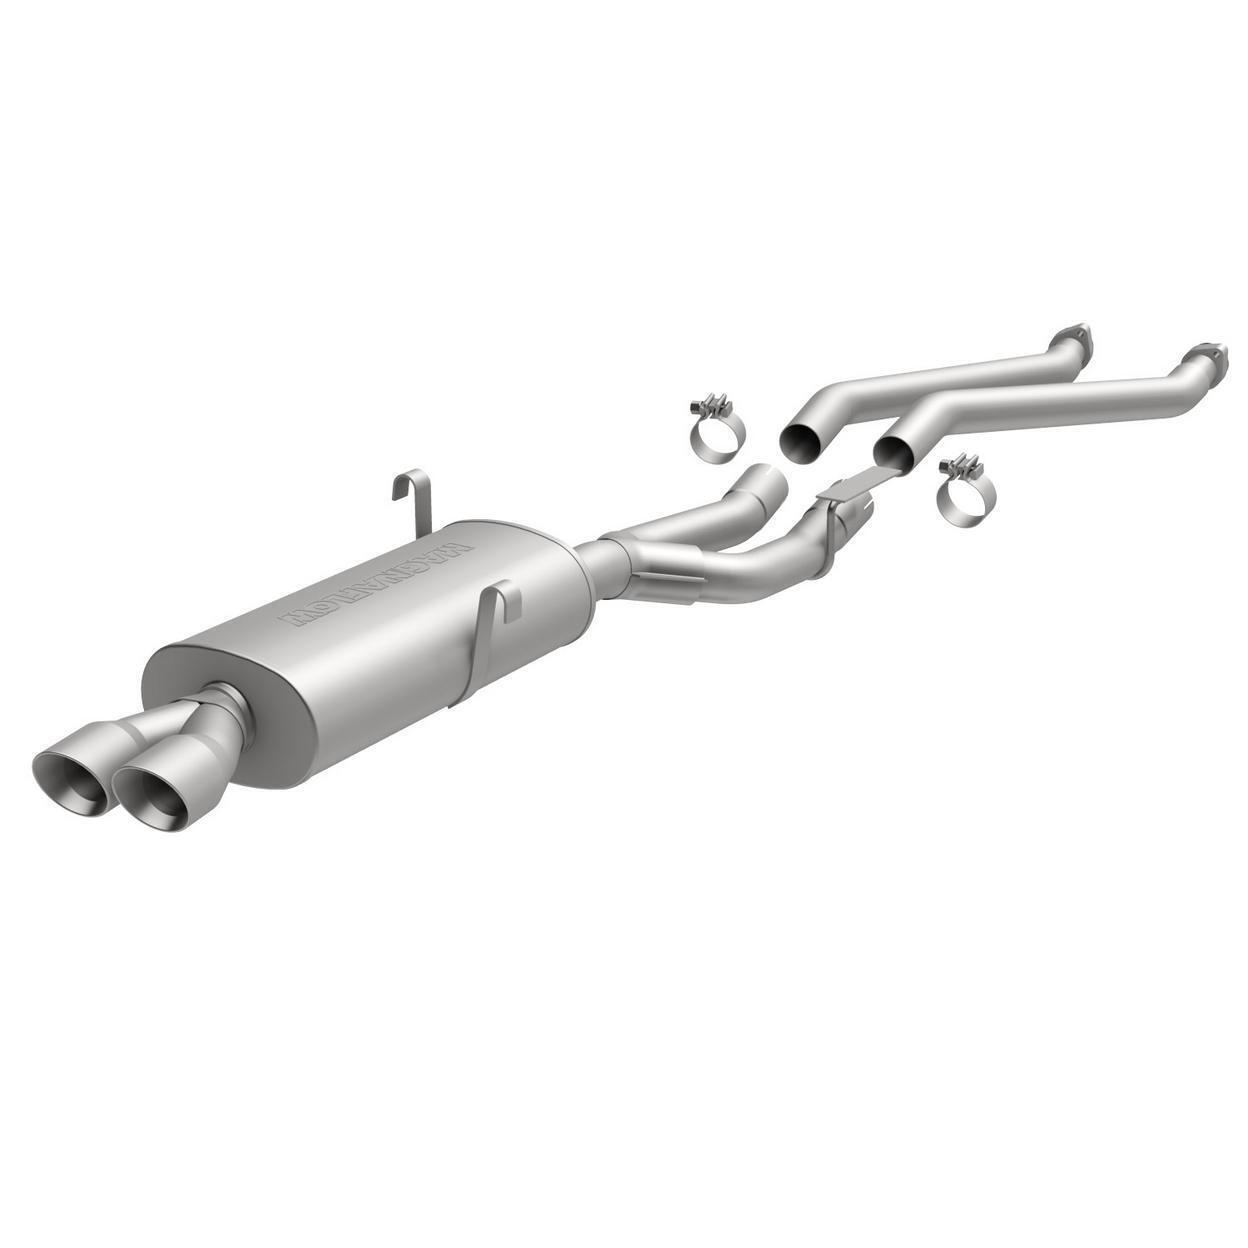 Exhaust System Kit for 1987-1990 BMW 325is